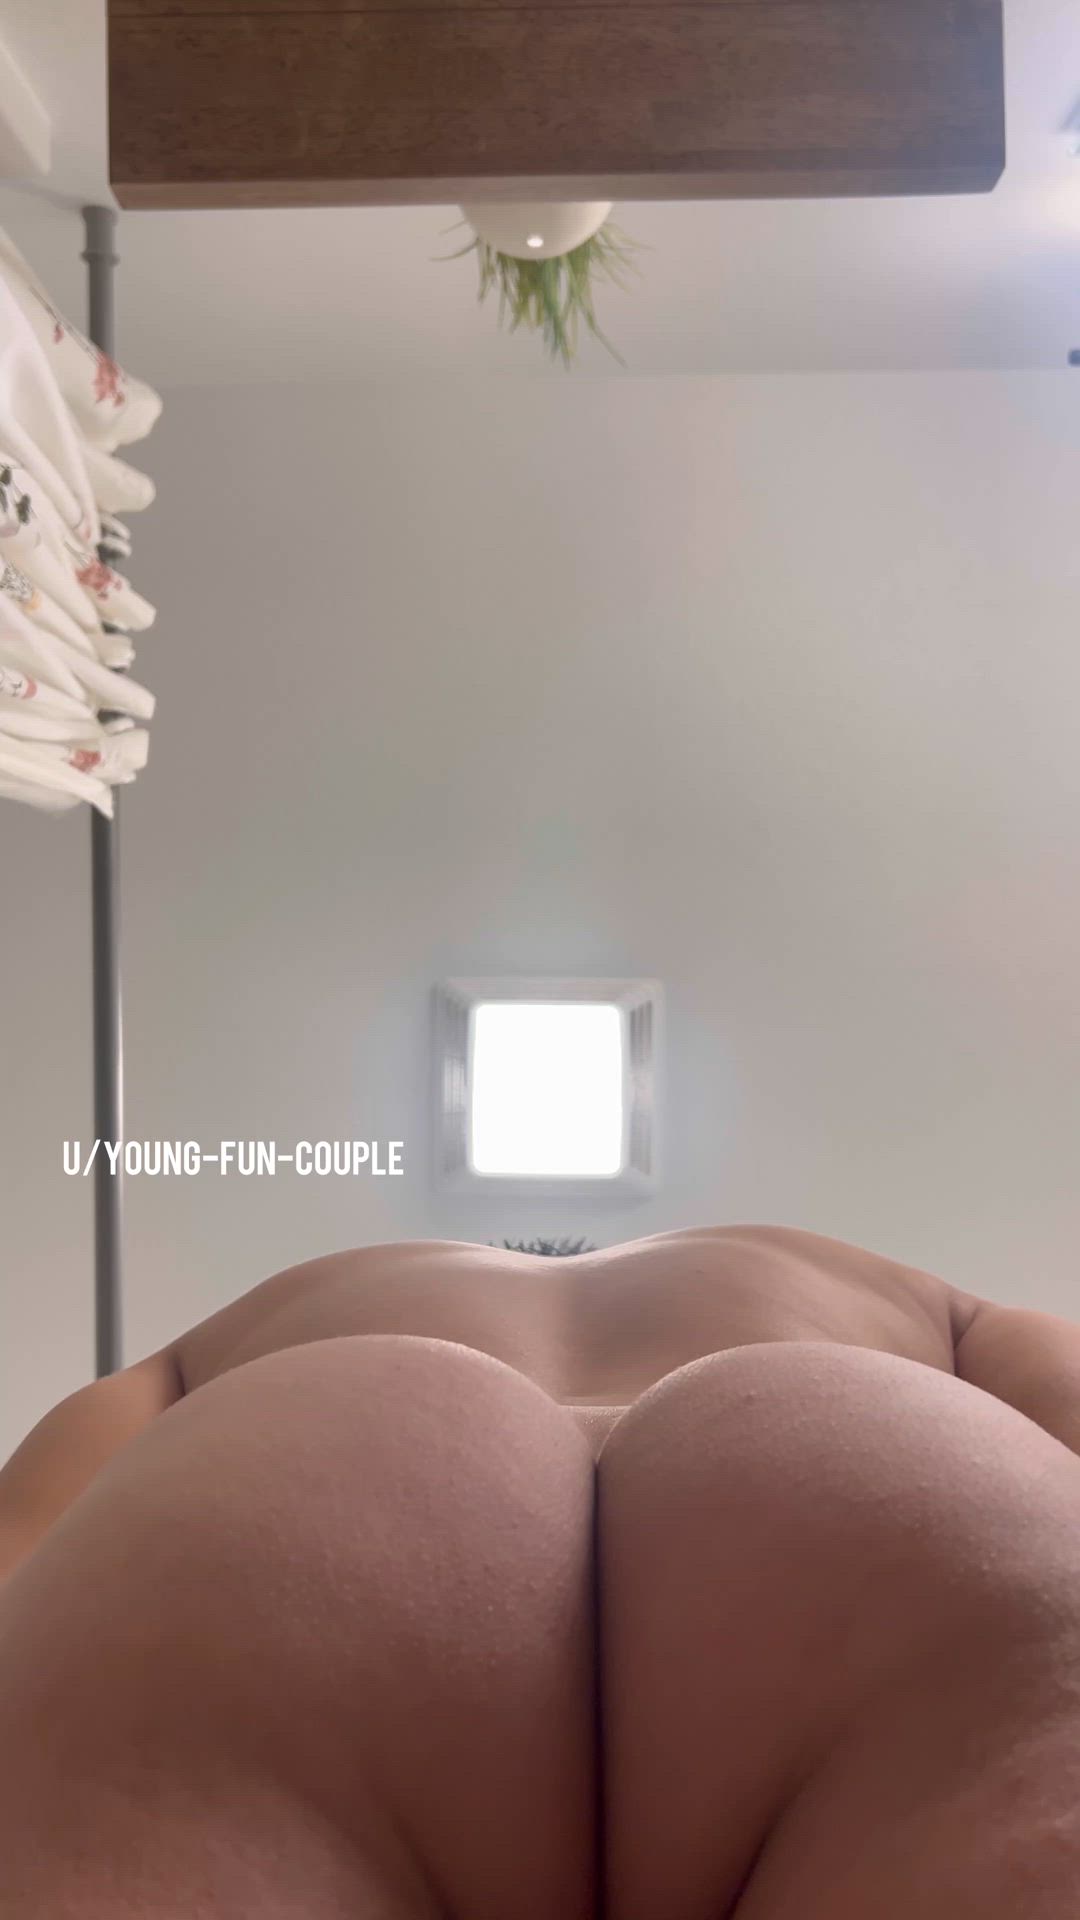 Booty porn video with onlyfans model young-fun-couple <strong>@fun_trvl_couple</strong>